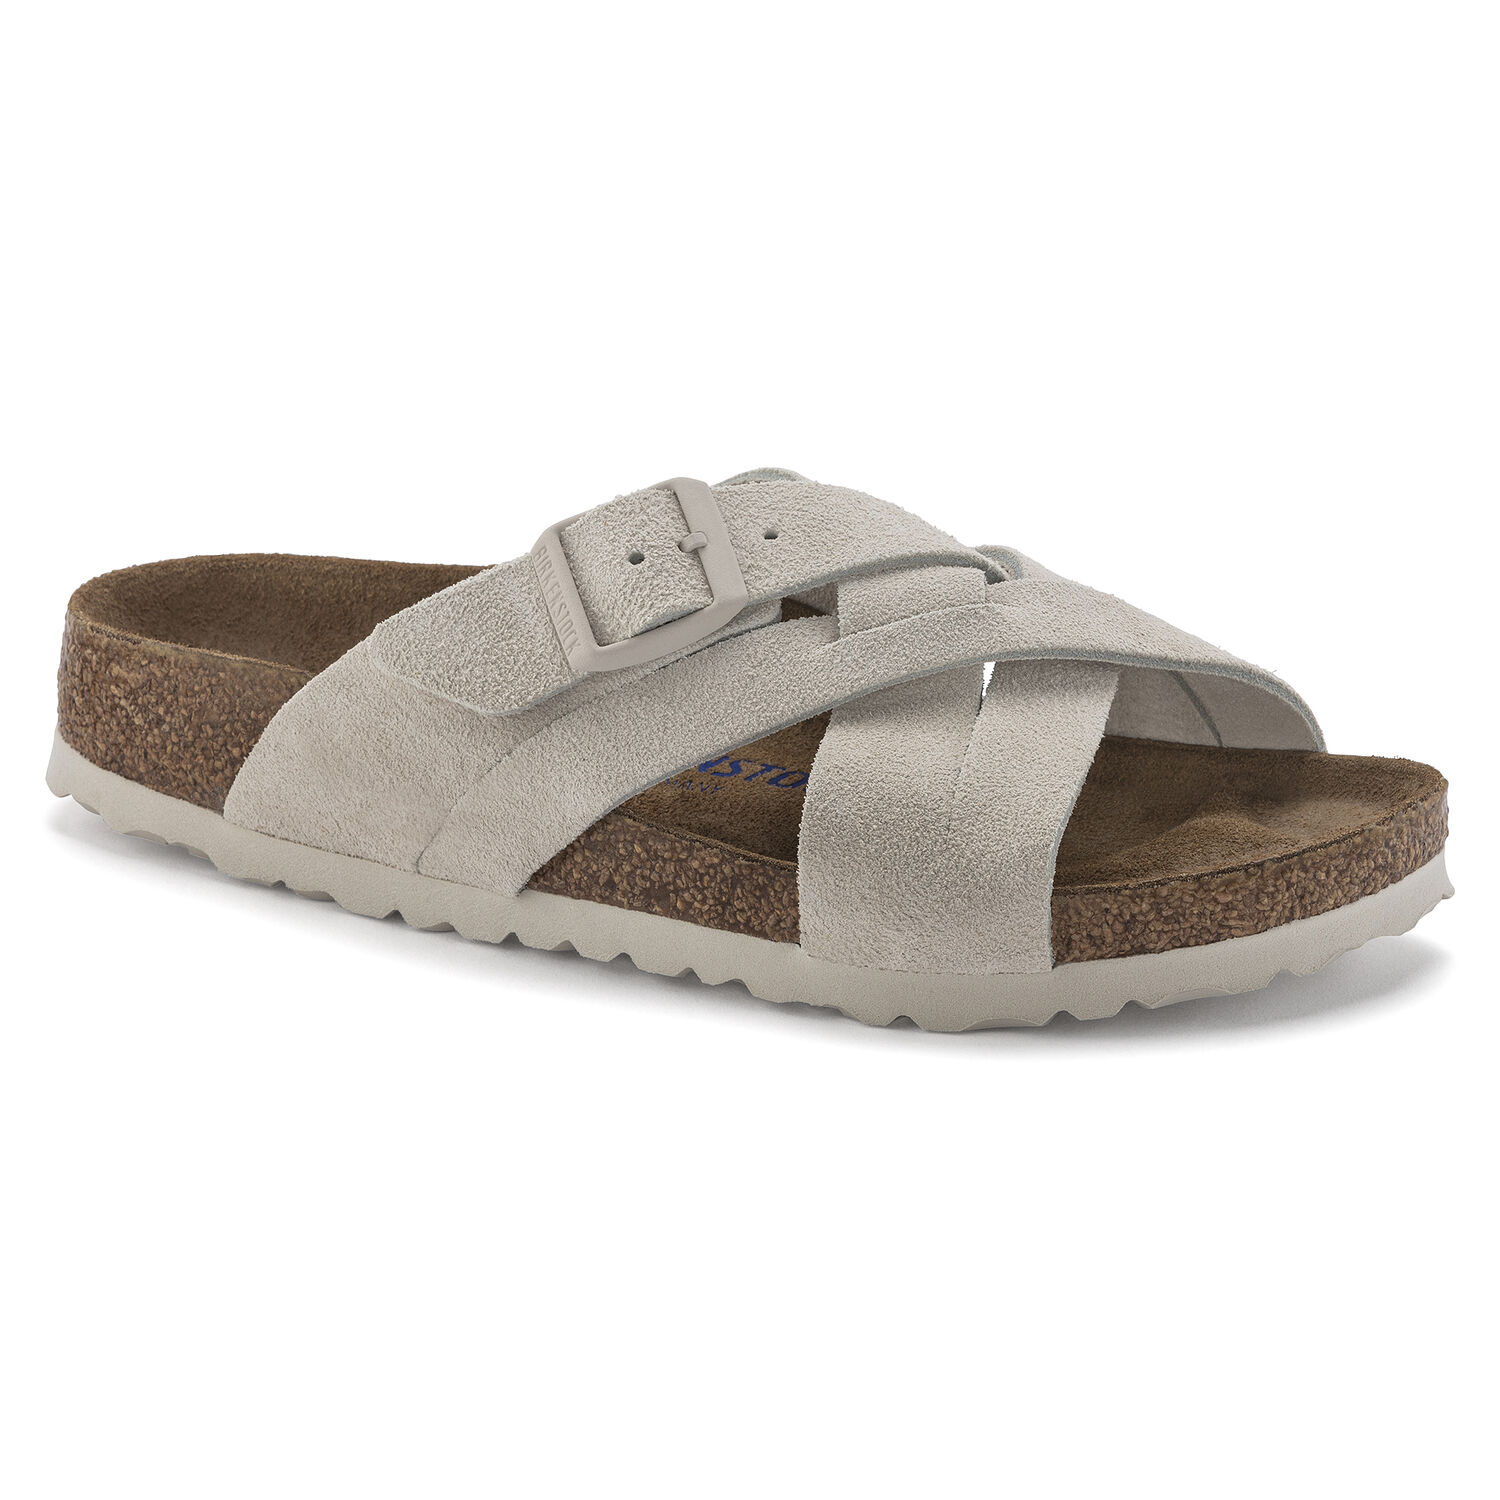 Lugano Soft Footbed Suede Leather Antique White | BIRKENSTOCK